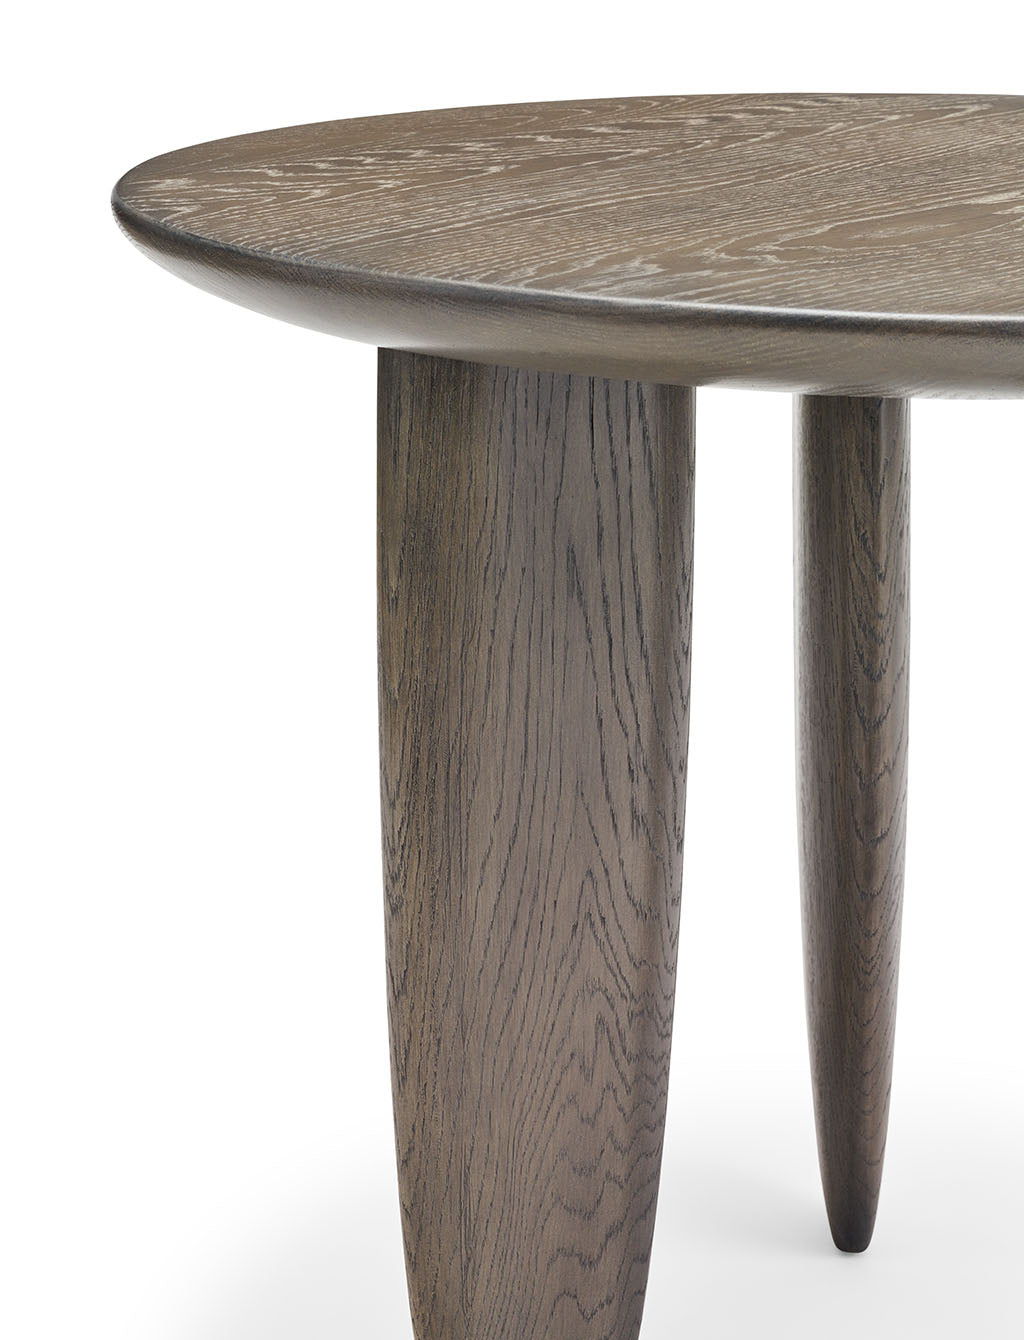 Juno End Table